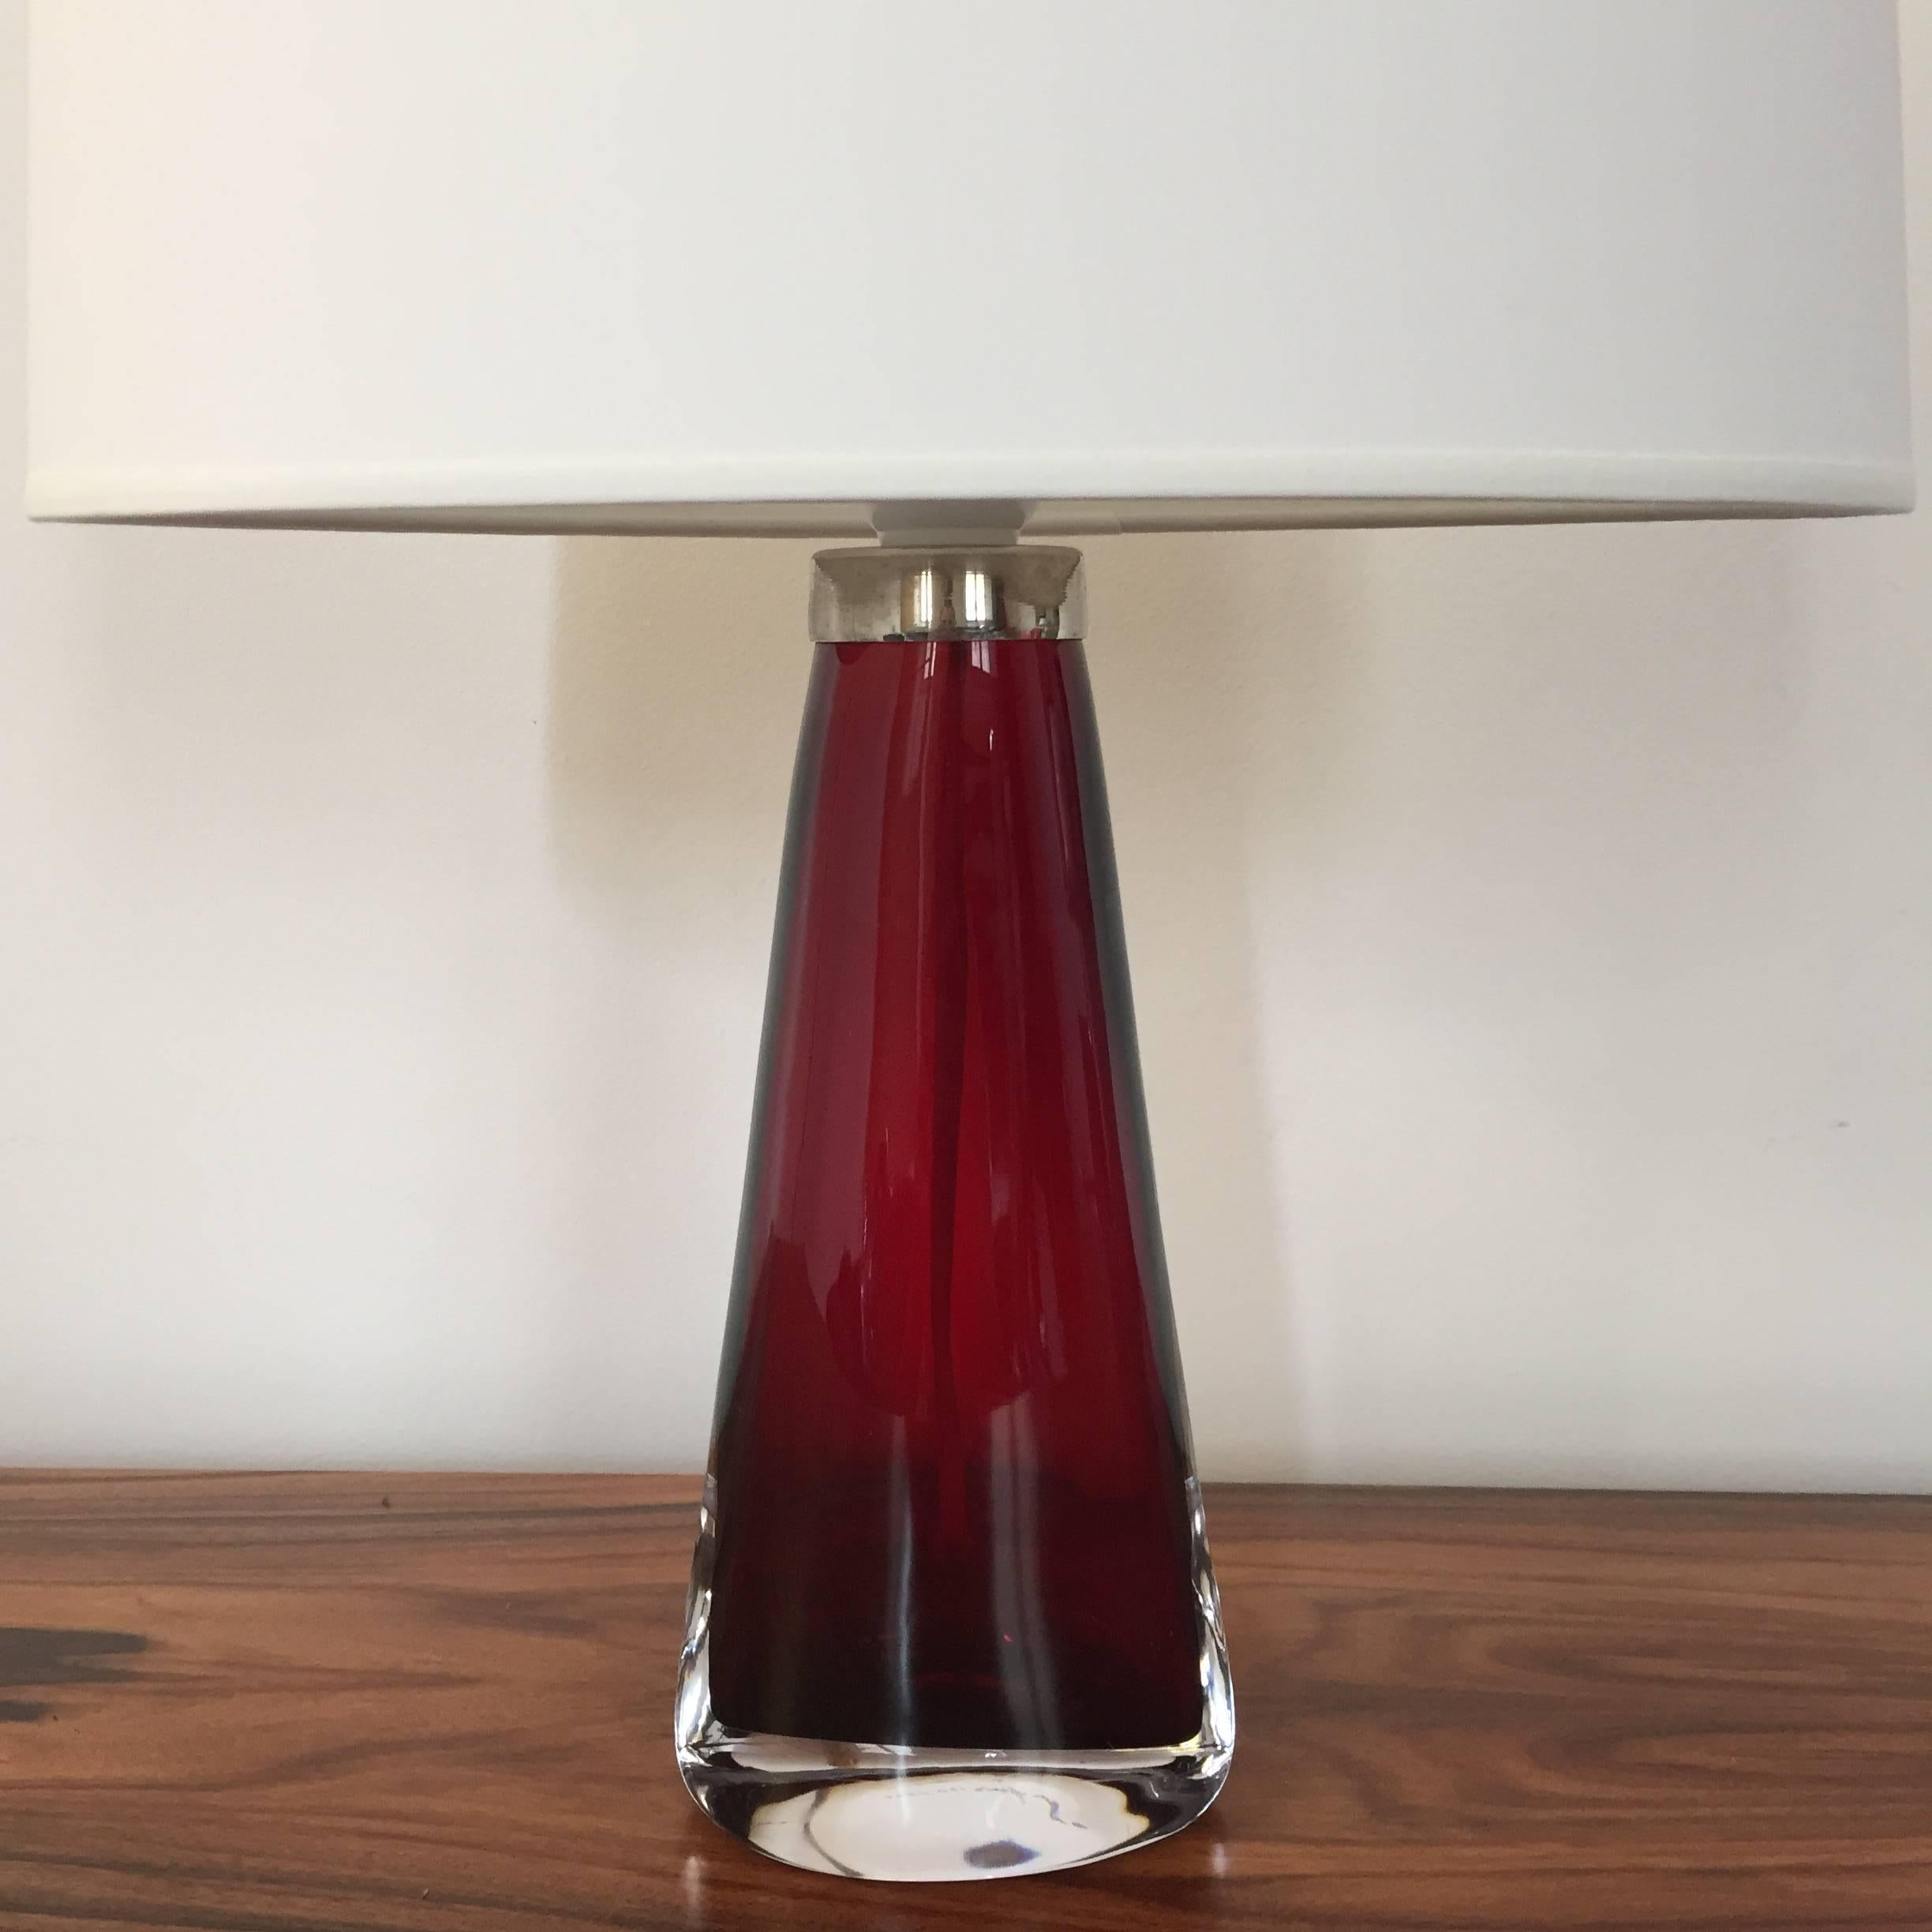 Elegant table lamps by Carl Fagerlund manufactured by Orrefors in the Graal manner,
Sweden, circa 1950.
The lamp is stamp on the chrome and signed in the glass.